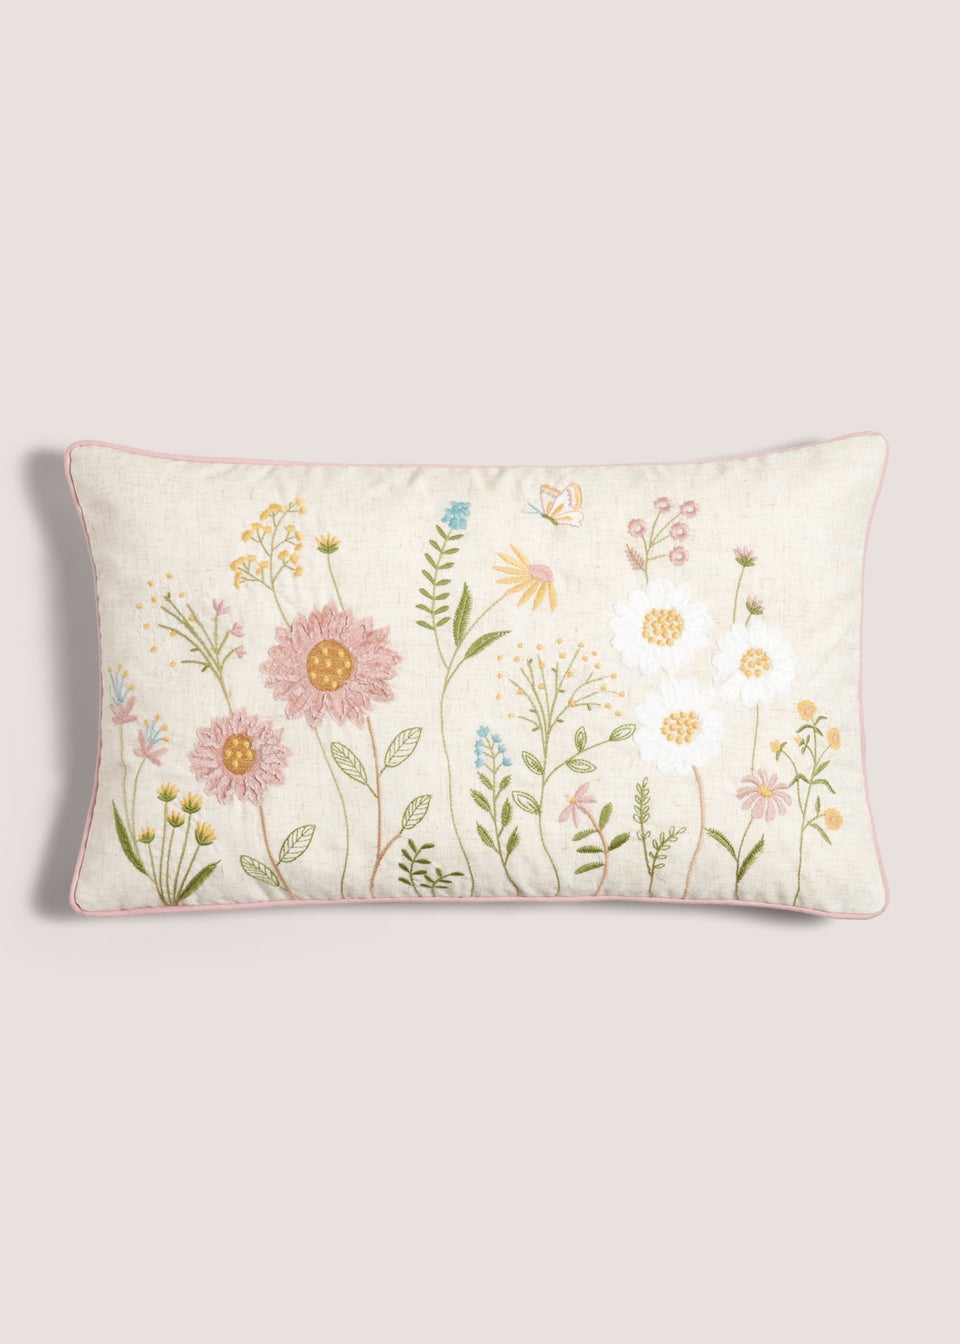 Floral Embroidered Cushion (30cm x 50cm)